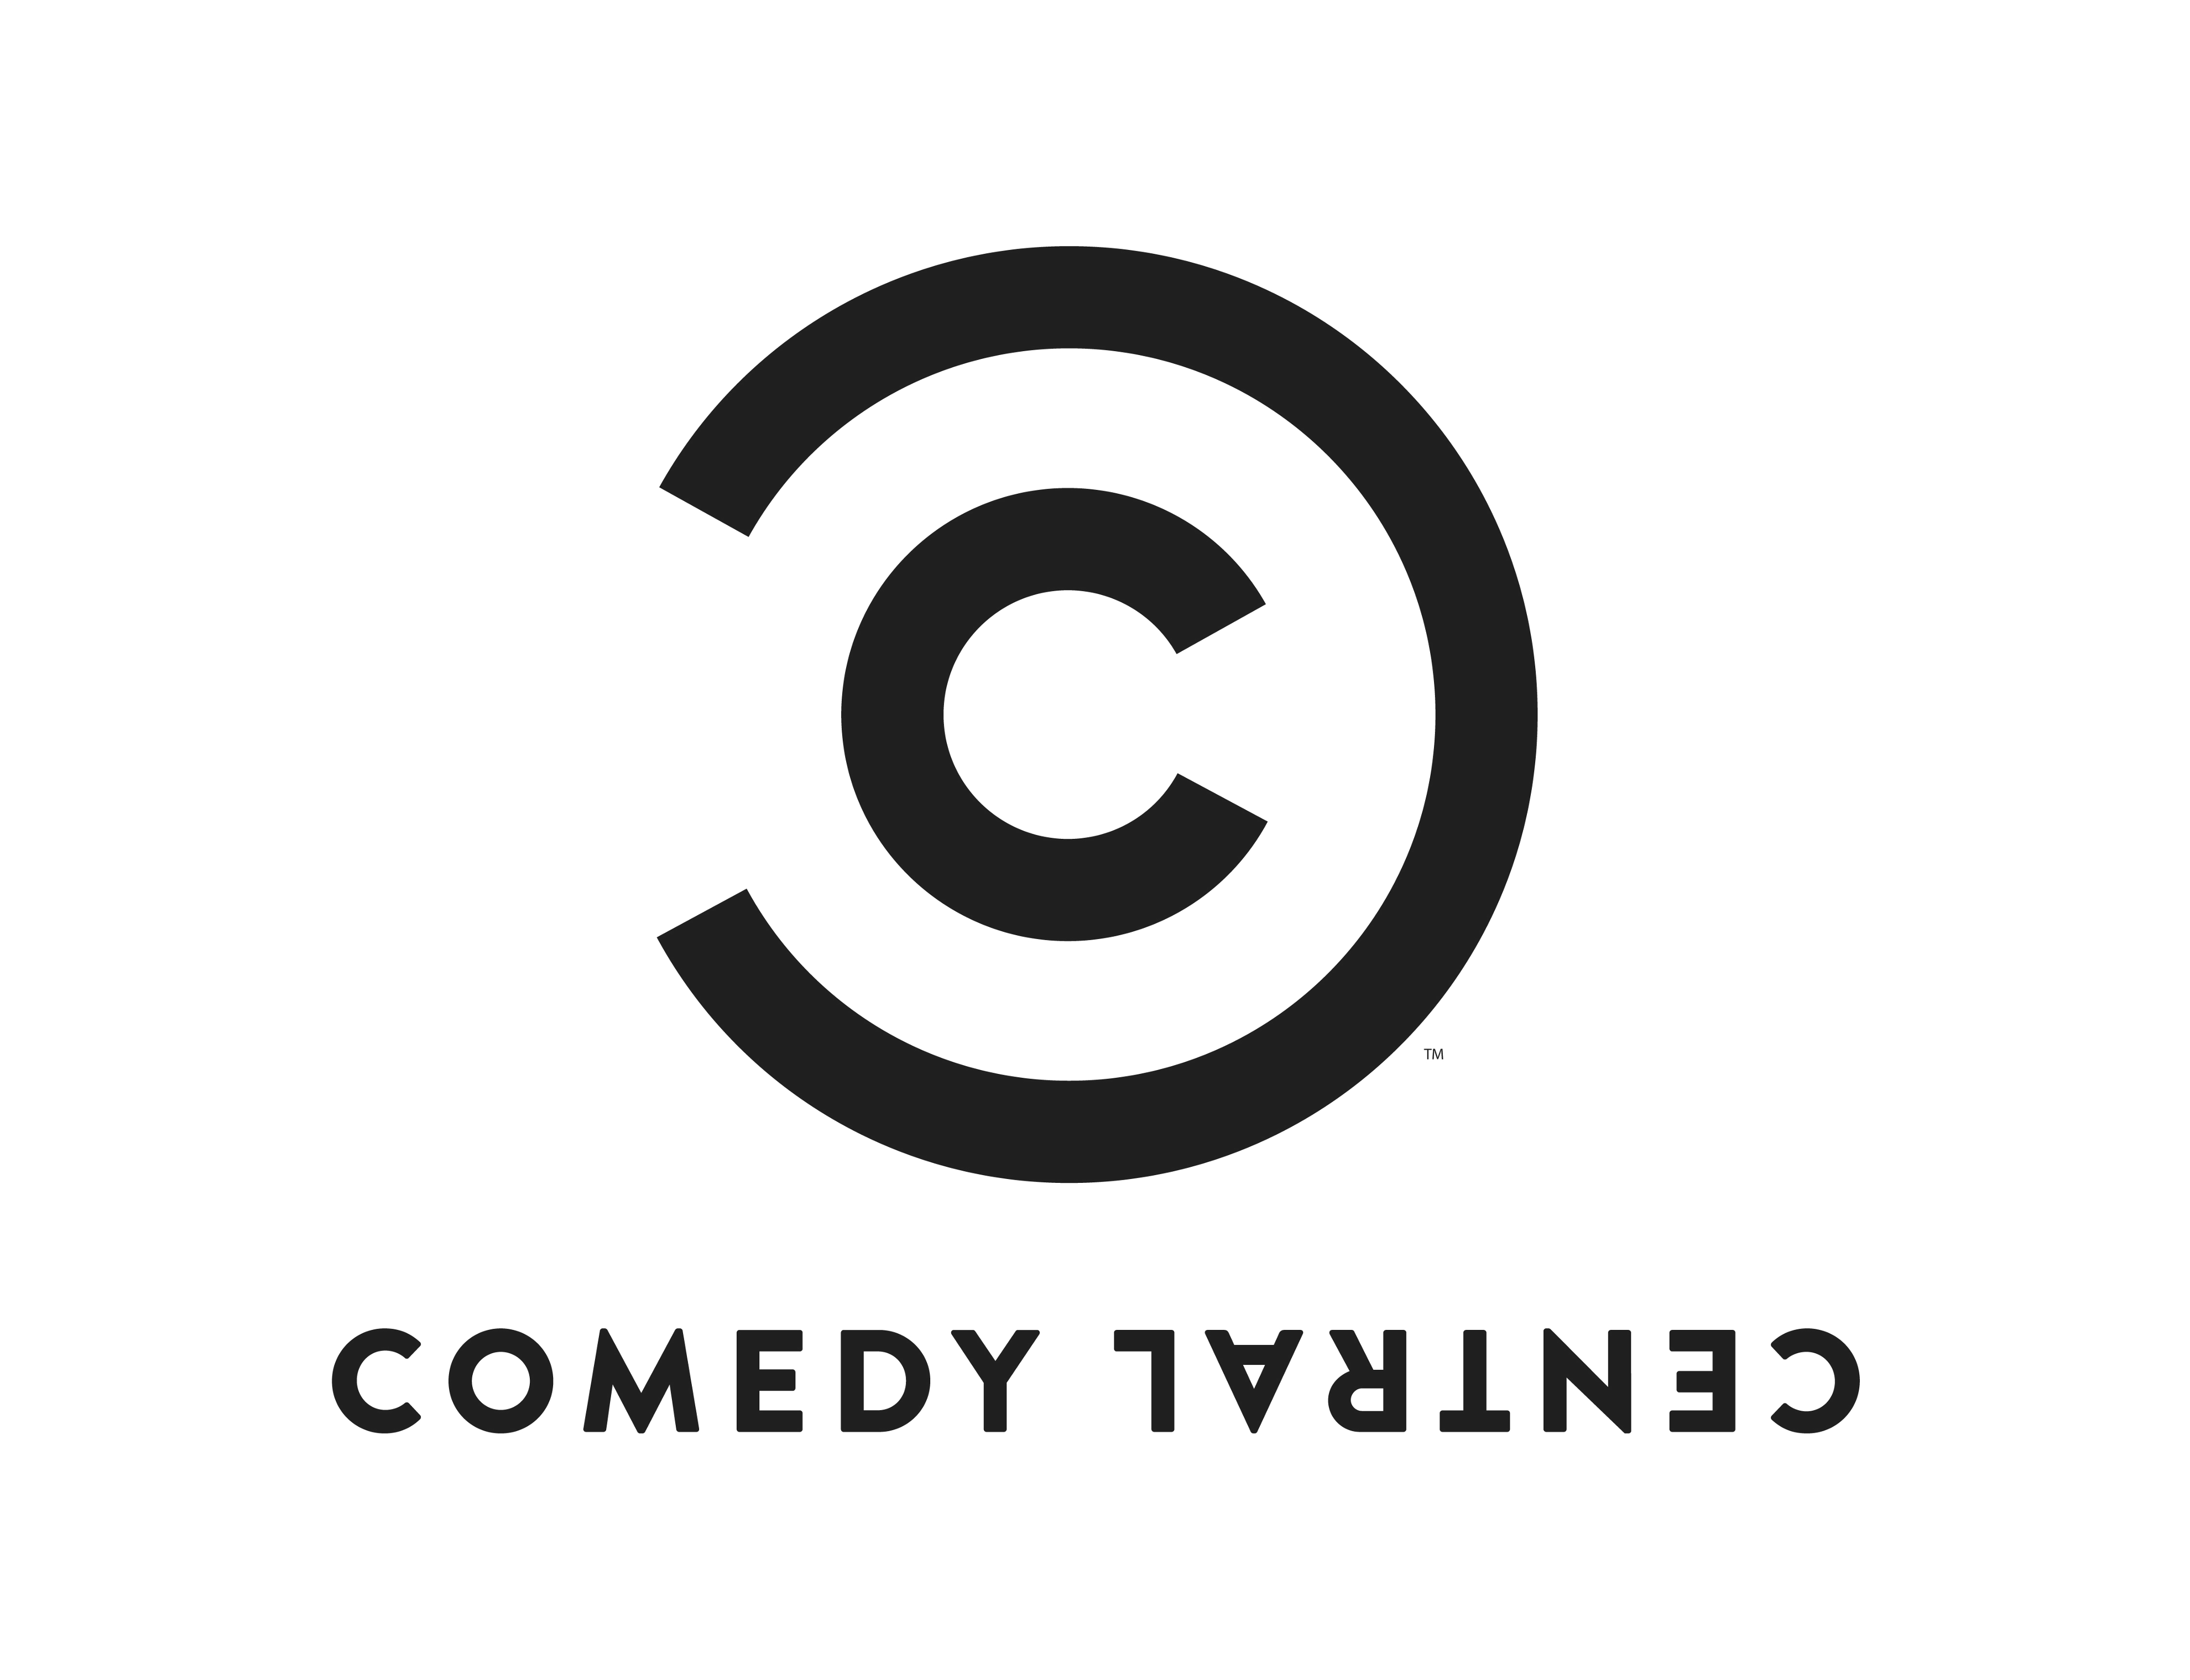 Central Logo - File:Comedy Central Logo 2011 vertikal.png - Wikimedia Commons